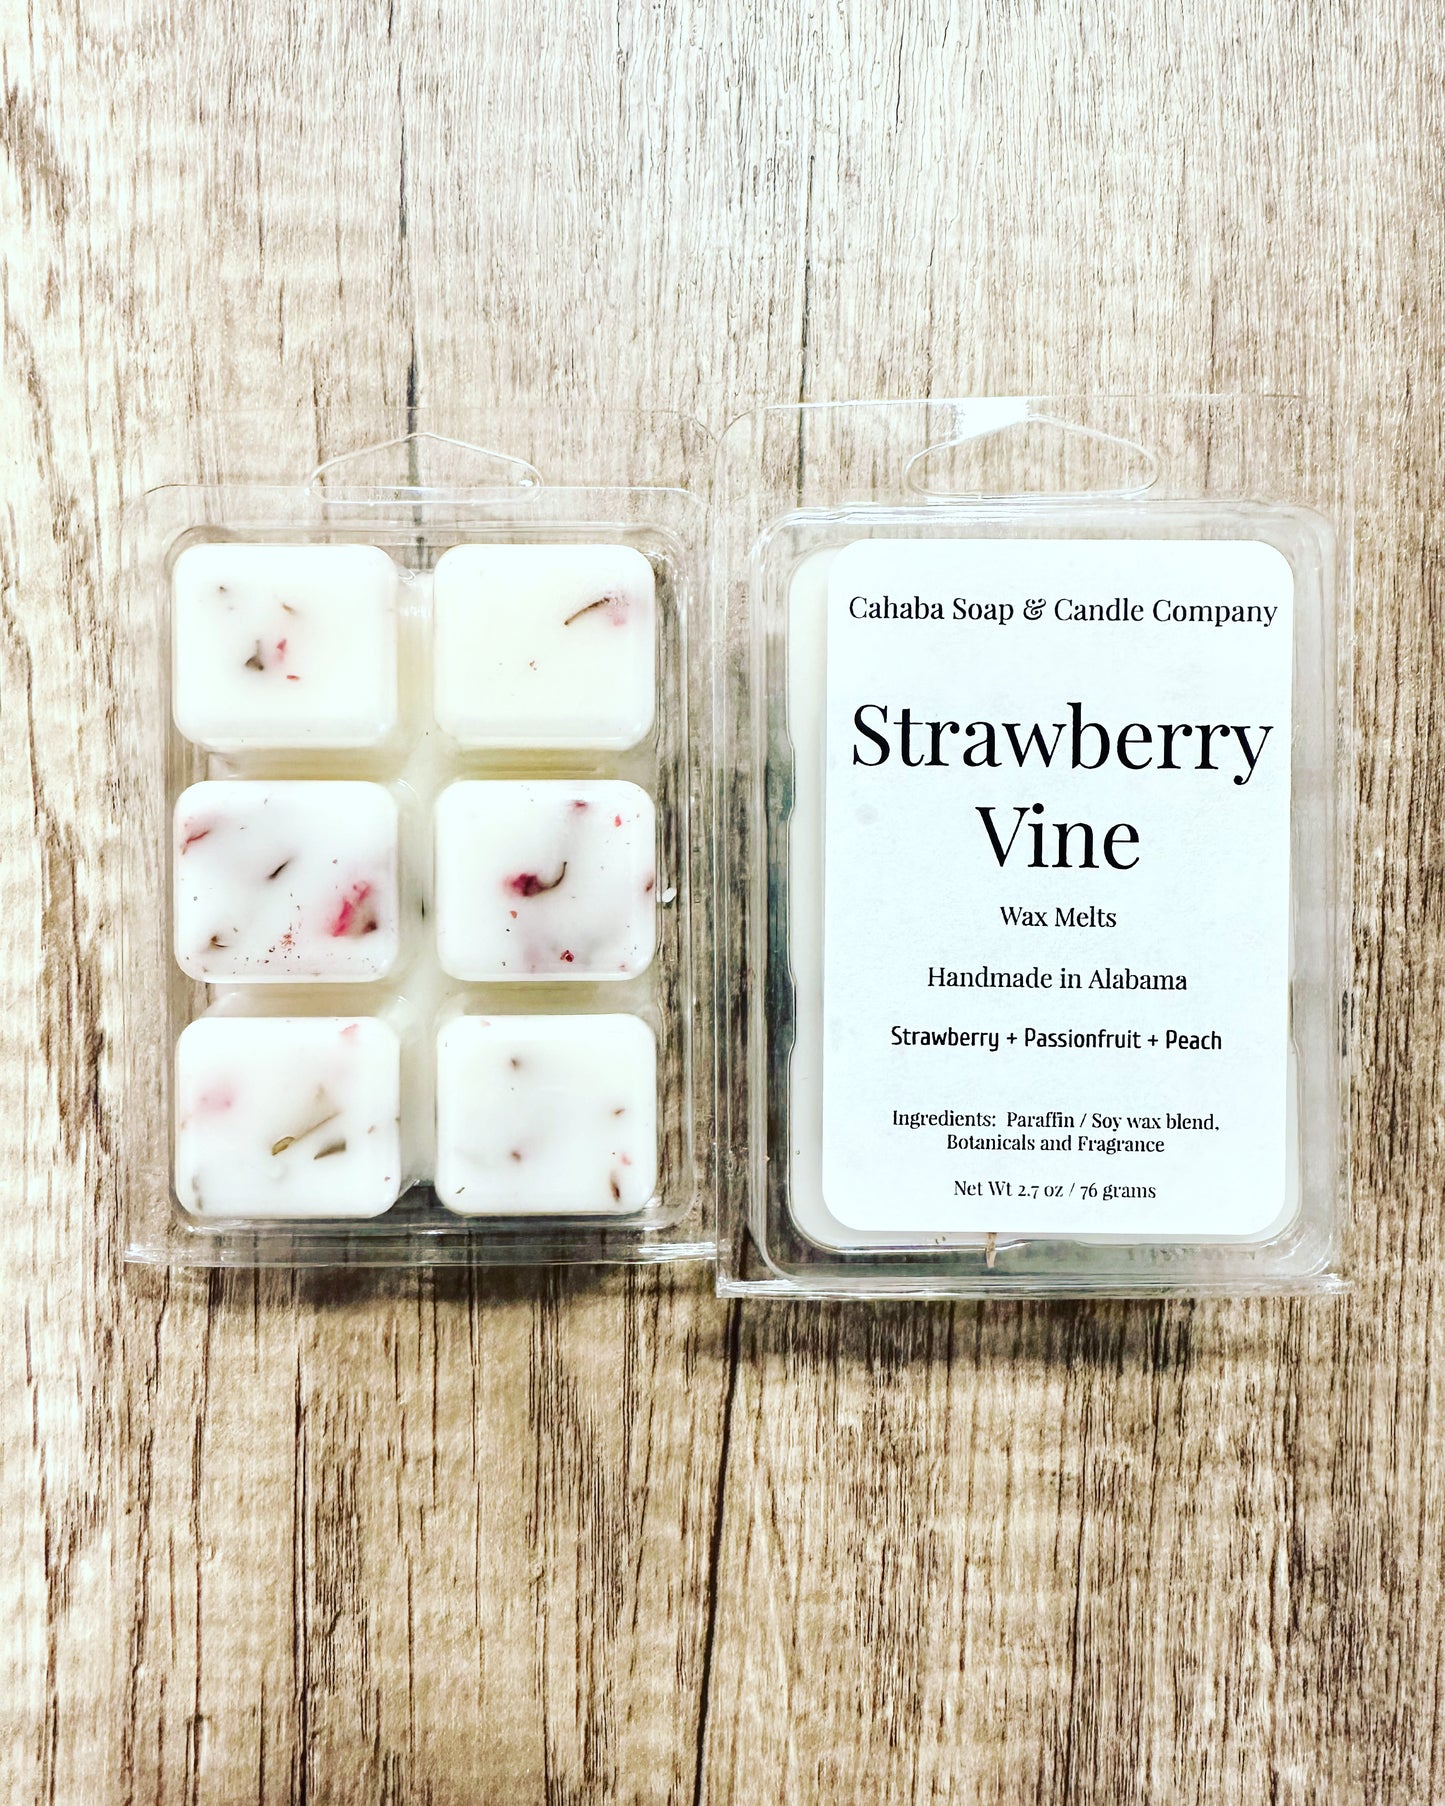 Strawberry Vine * Limited Time Only*